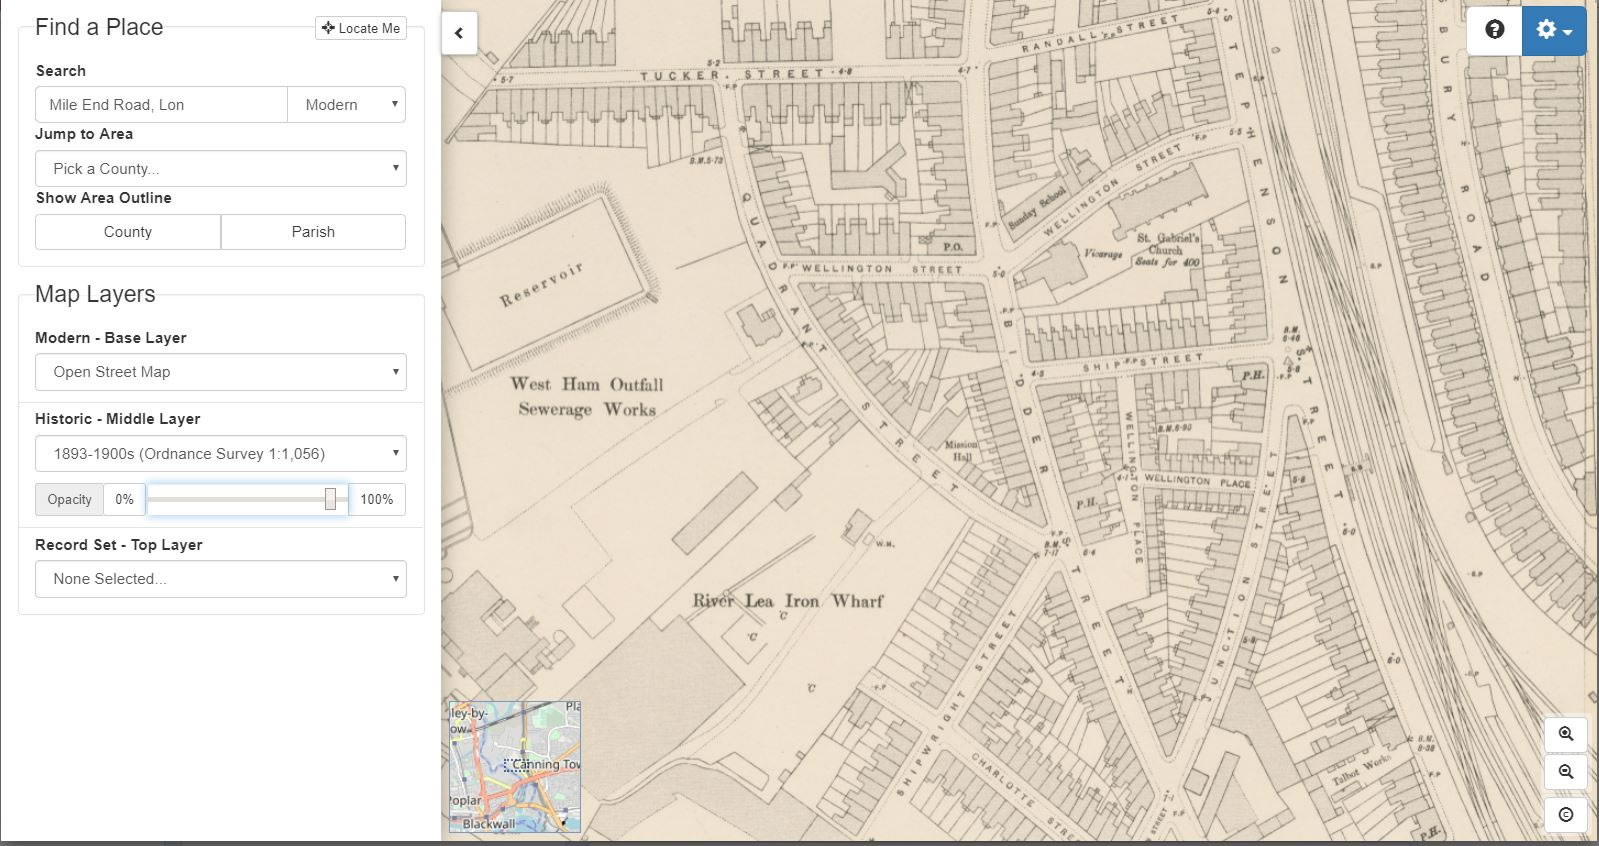 TheGenealogist's Map Explorer shows Quadrant Street once curved from Bidder Street and faced the West Ham Outfall Sewage Works.